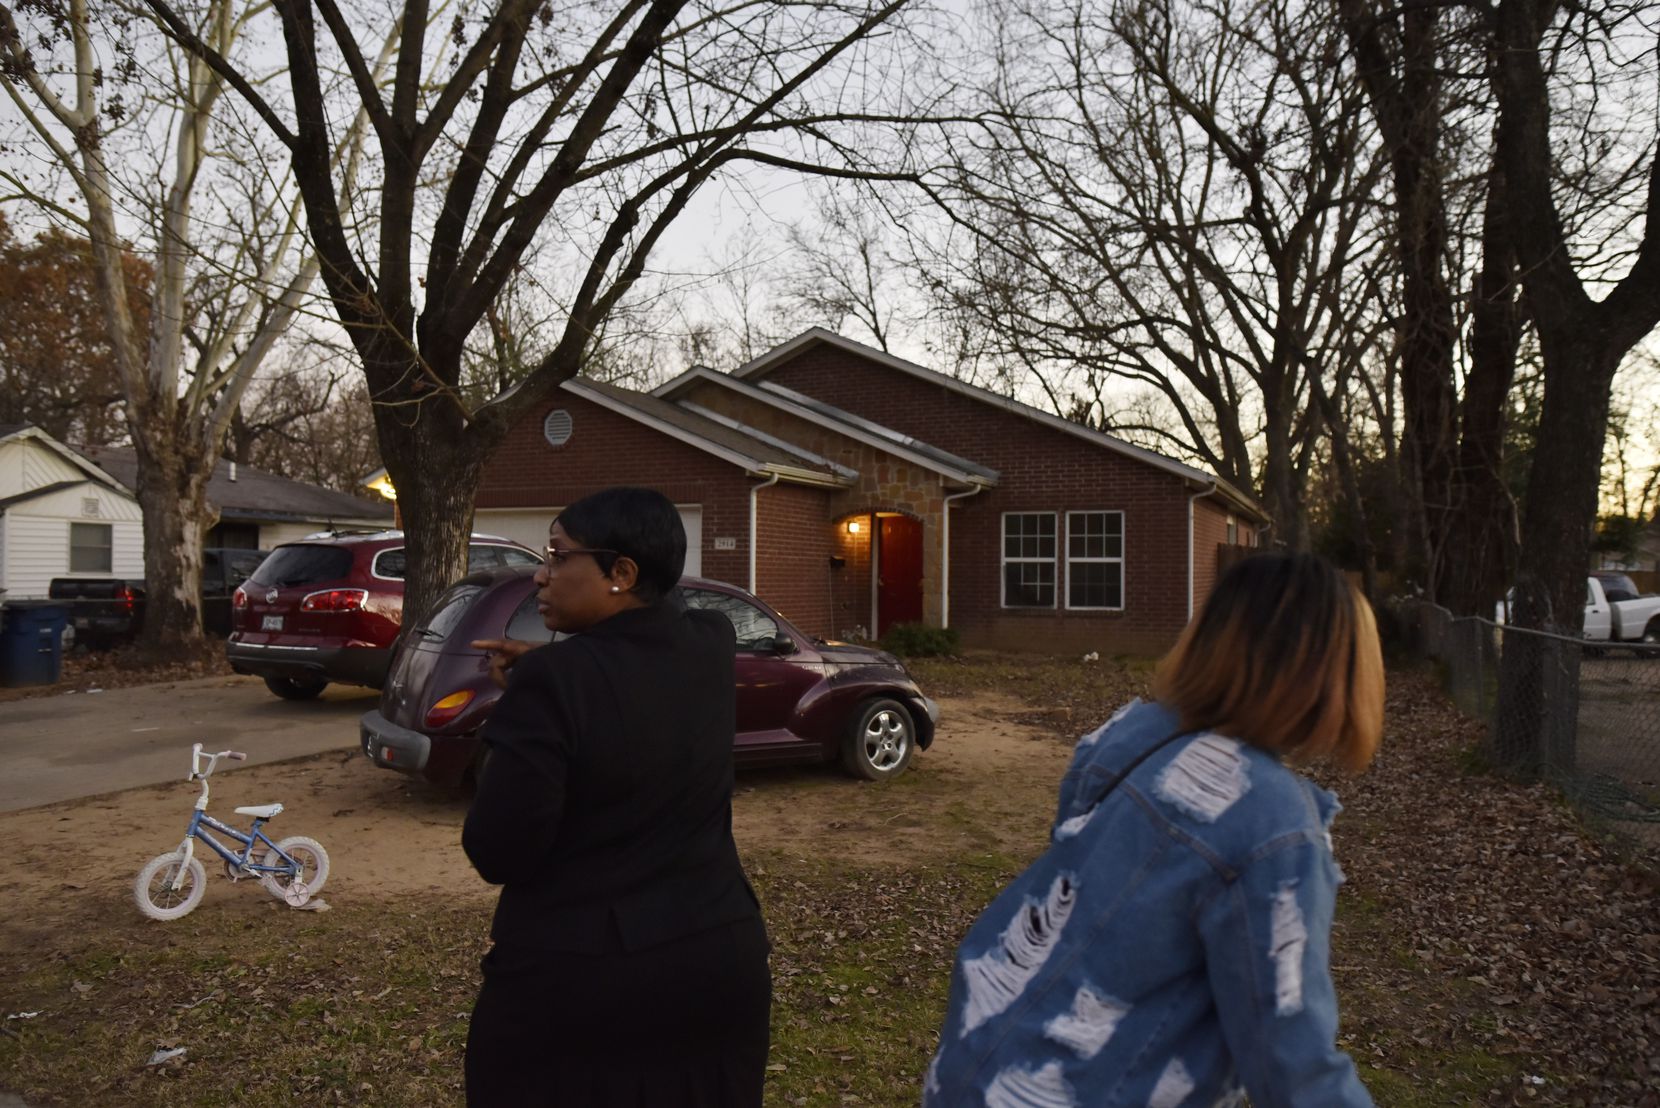 Ella Mae Beasley, 57, left, and her niece walked by the home where 1-year-old Rory Norman was shot and killed early Sunday morning on Valentine Street in South Dallas, Jan. 5, 2020. So far there have been four murders in 2020. 